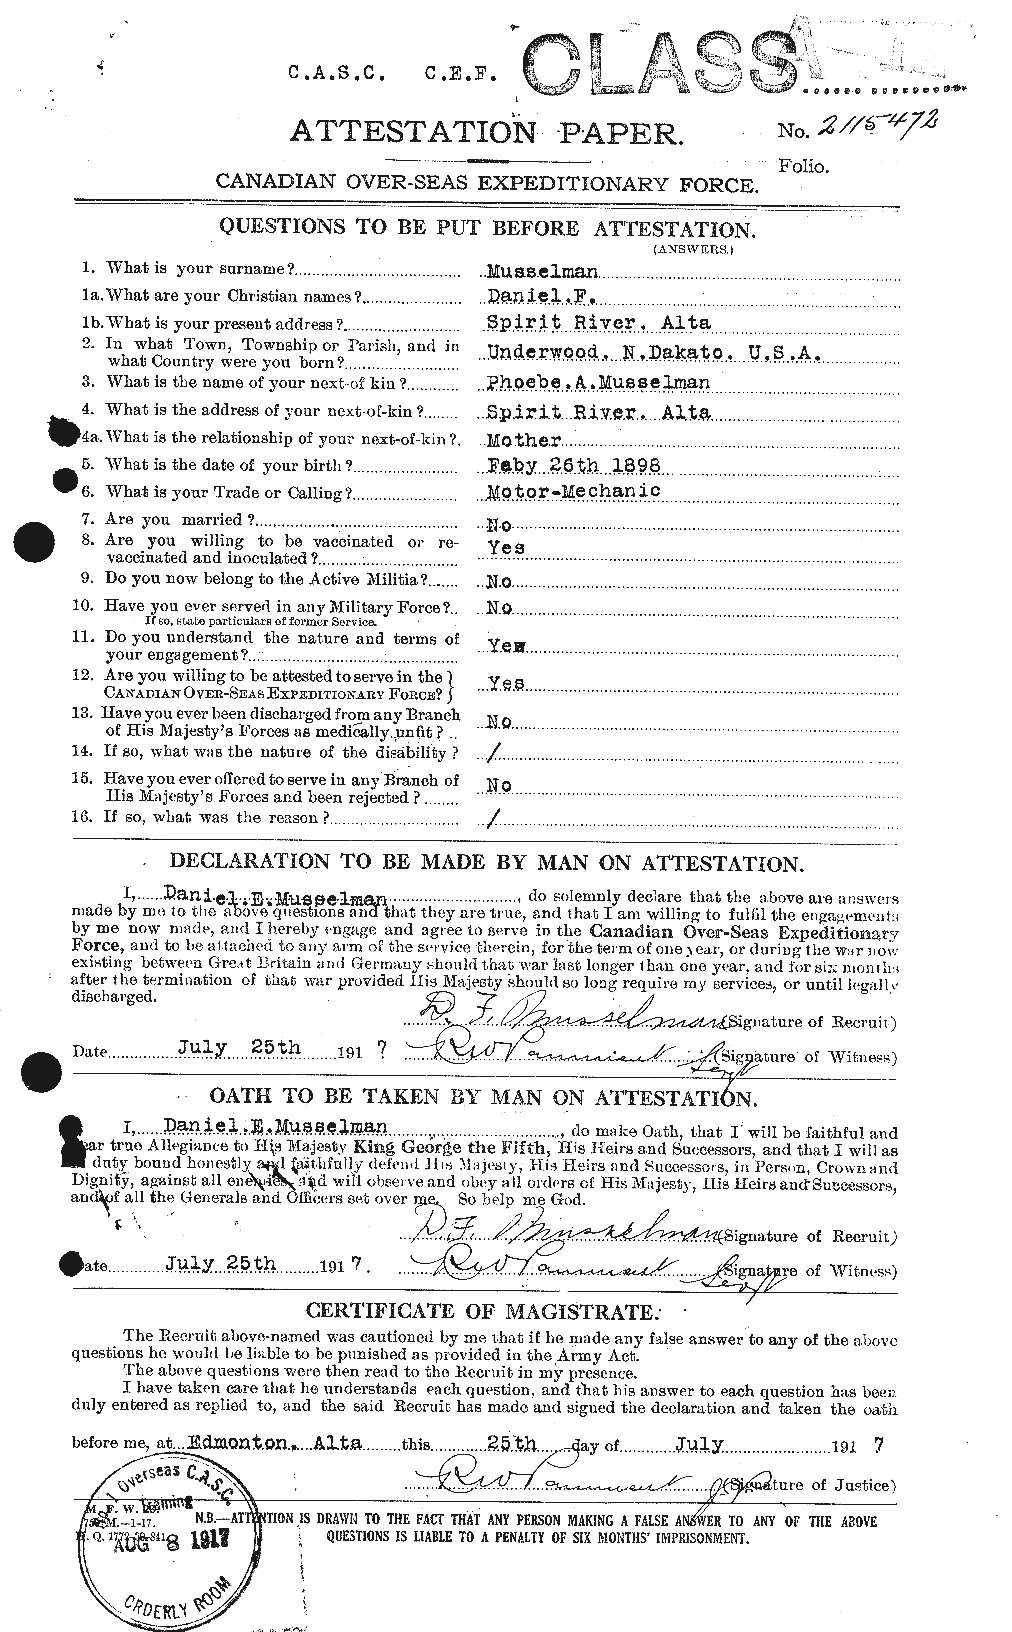 Personnel Records of the First World War - CEF 515019a